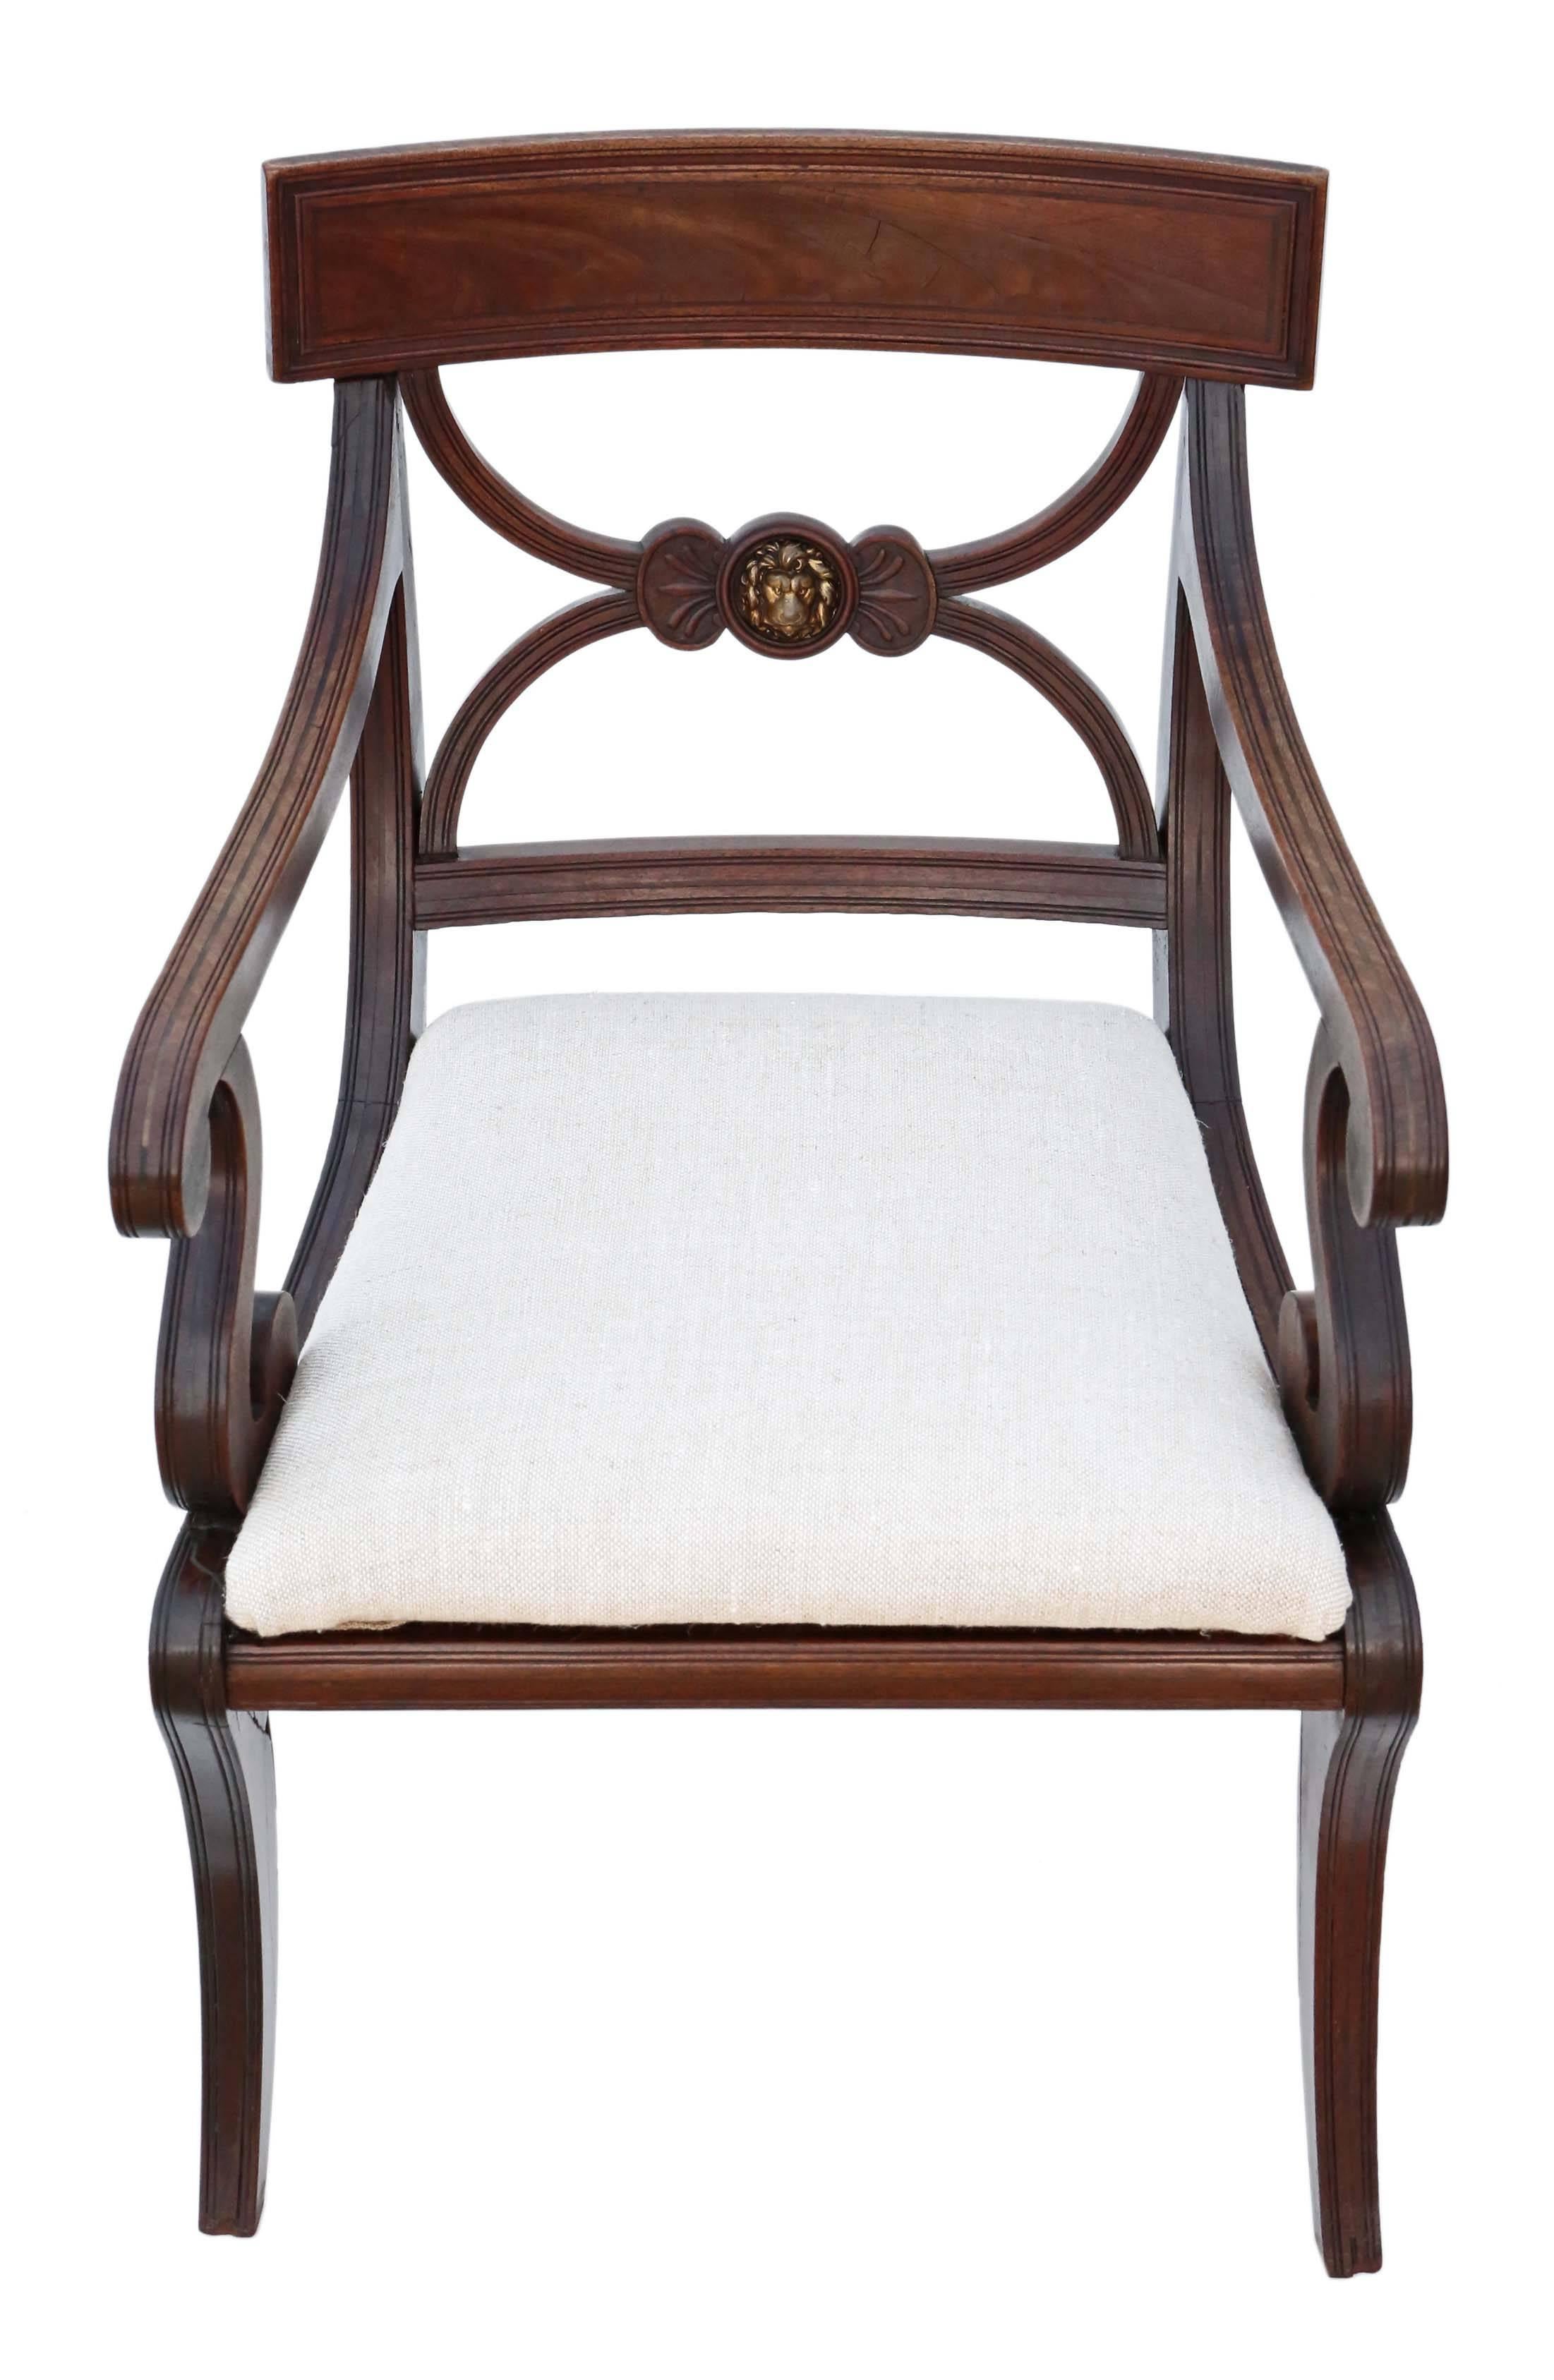 Antique quality Regency mahogany elbow desk chair, circa 1825. Could also be used as a side, hall or carver chair.

Solid and strong, with no loose joints and no woodworm. Full of age, character and charm. An elegant attractive chair with the best